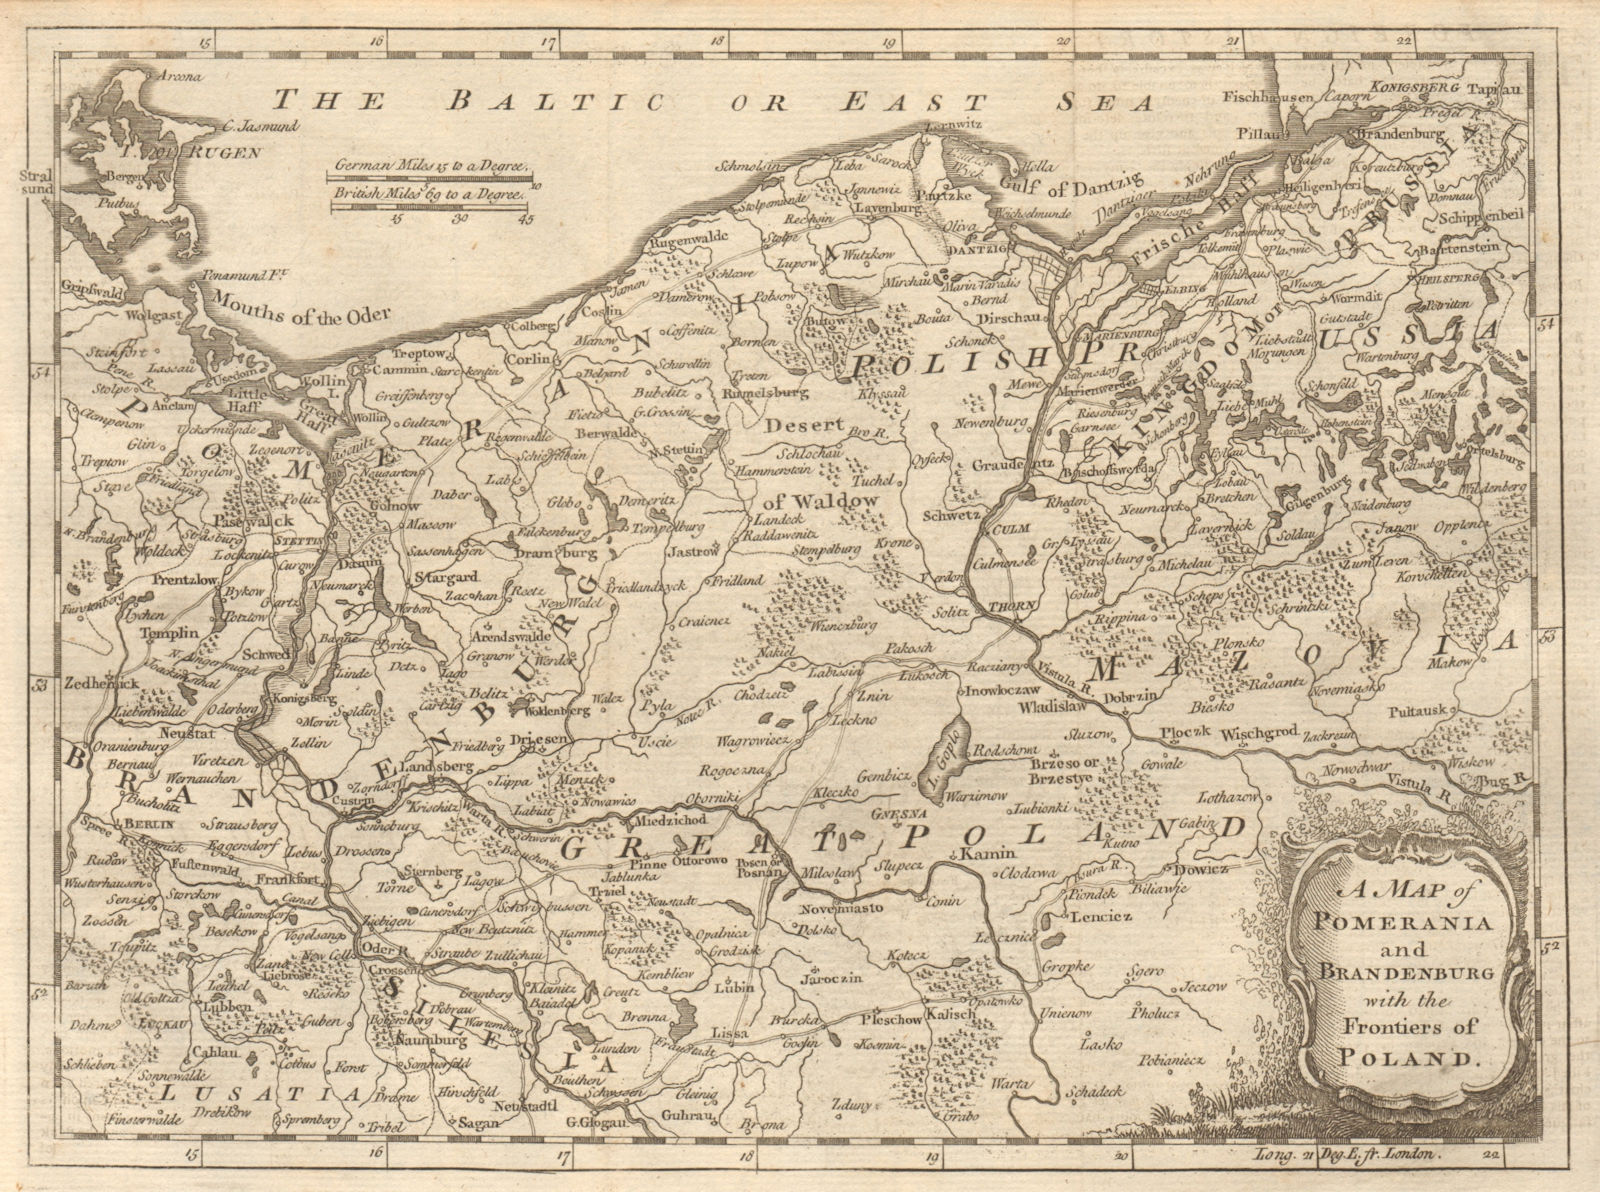 Pomerania & Brandenburg with the frontiers of Poland. GENTS MAG 1759 old map